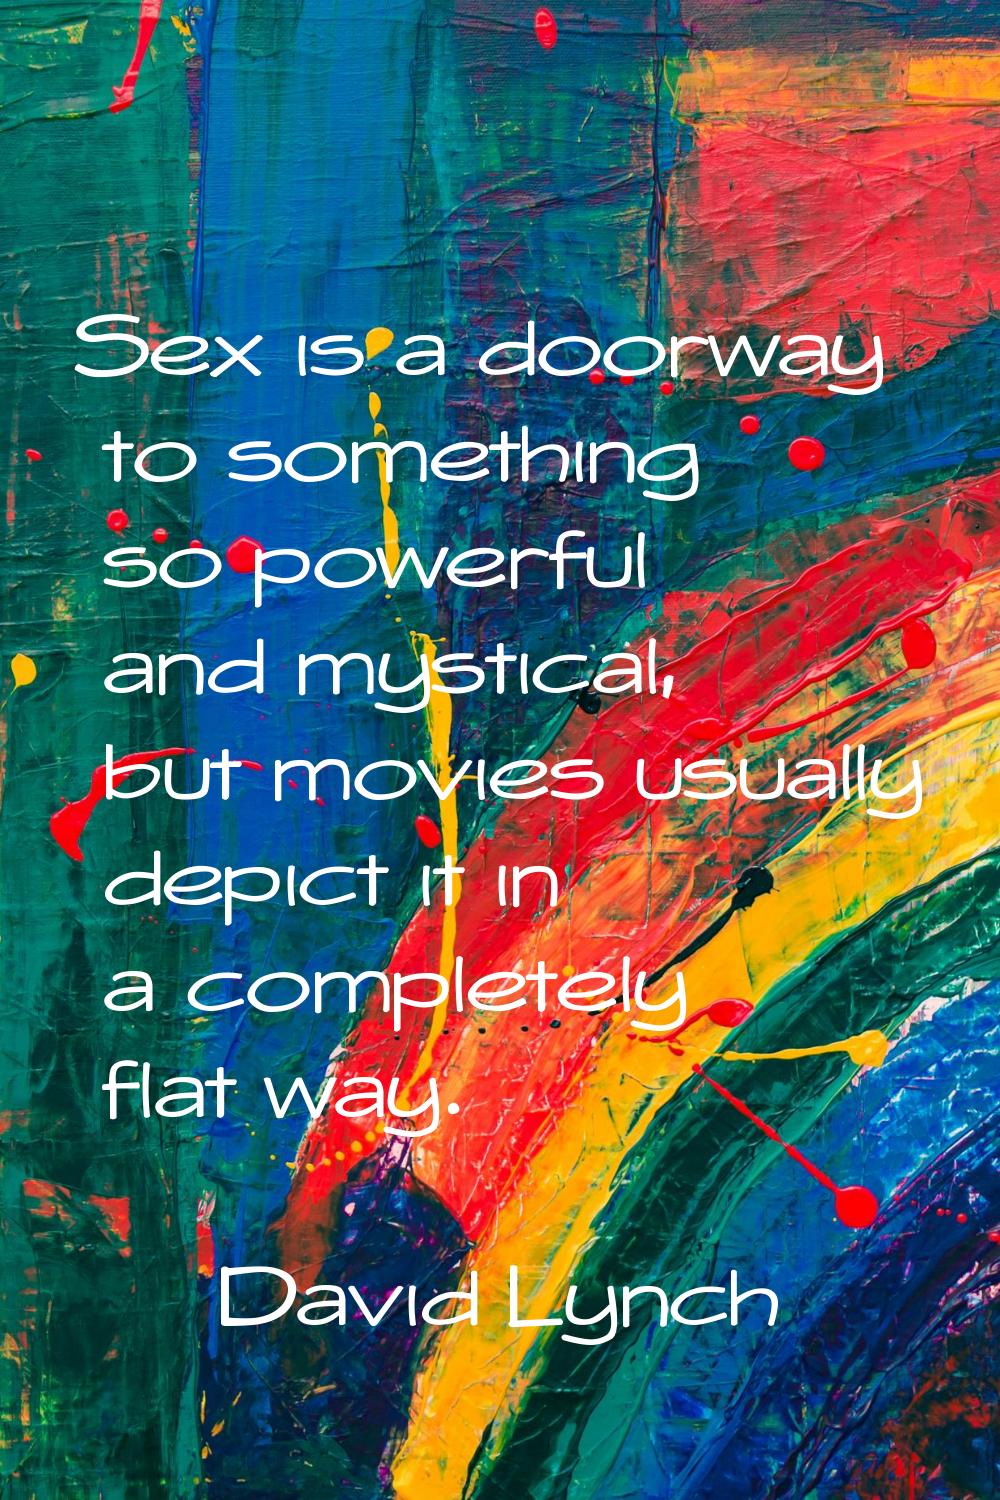 Sex is a doorway to something so powerful and mystical, but movies usually depict it in a completel